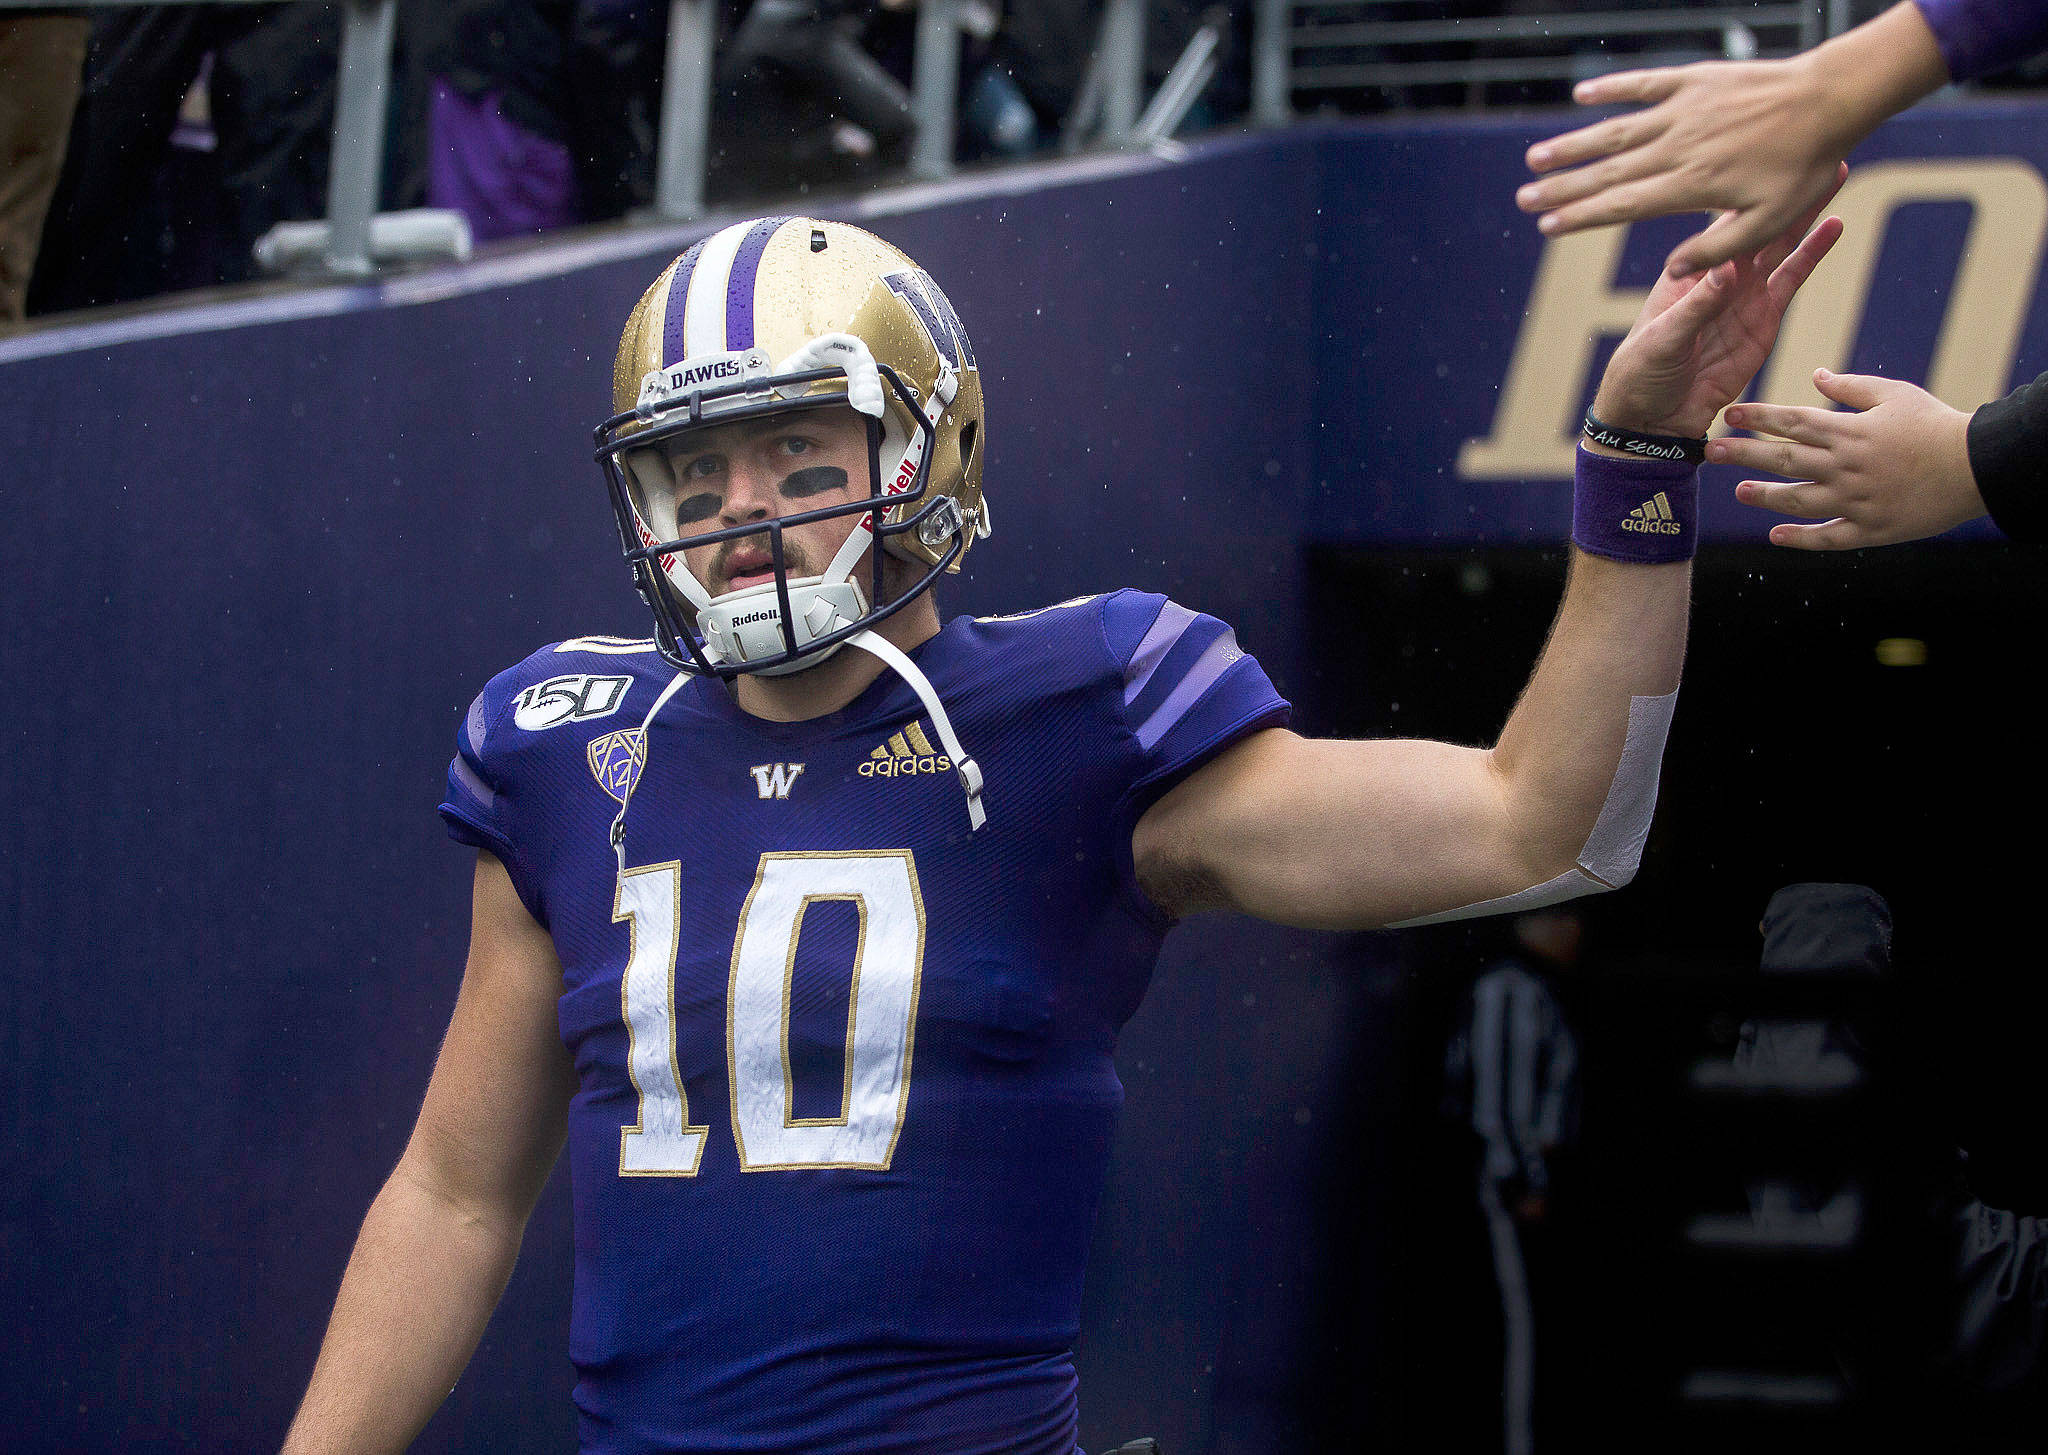 Washington quarterback Jacob Eason, a Lake Stevens alum, high-fives fans as he walks out onto the field before a game against Oregon on Oct. 19, 2019, in Seattle. (Olivia Vanni / The Herald)